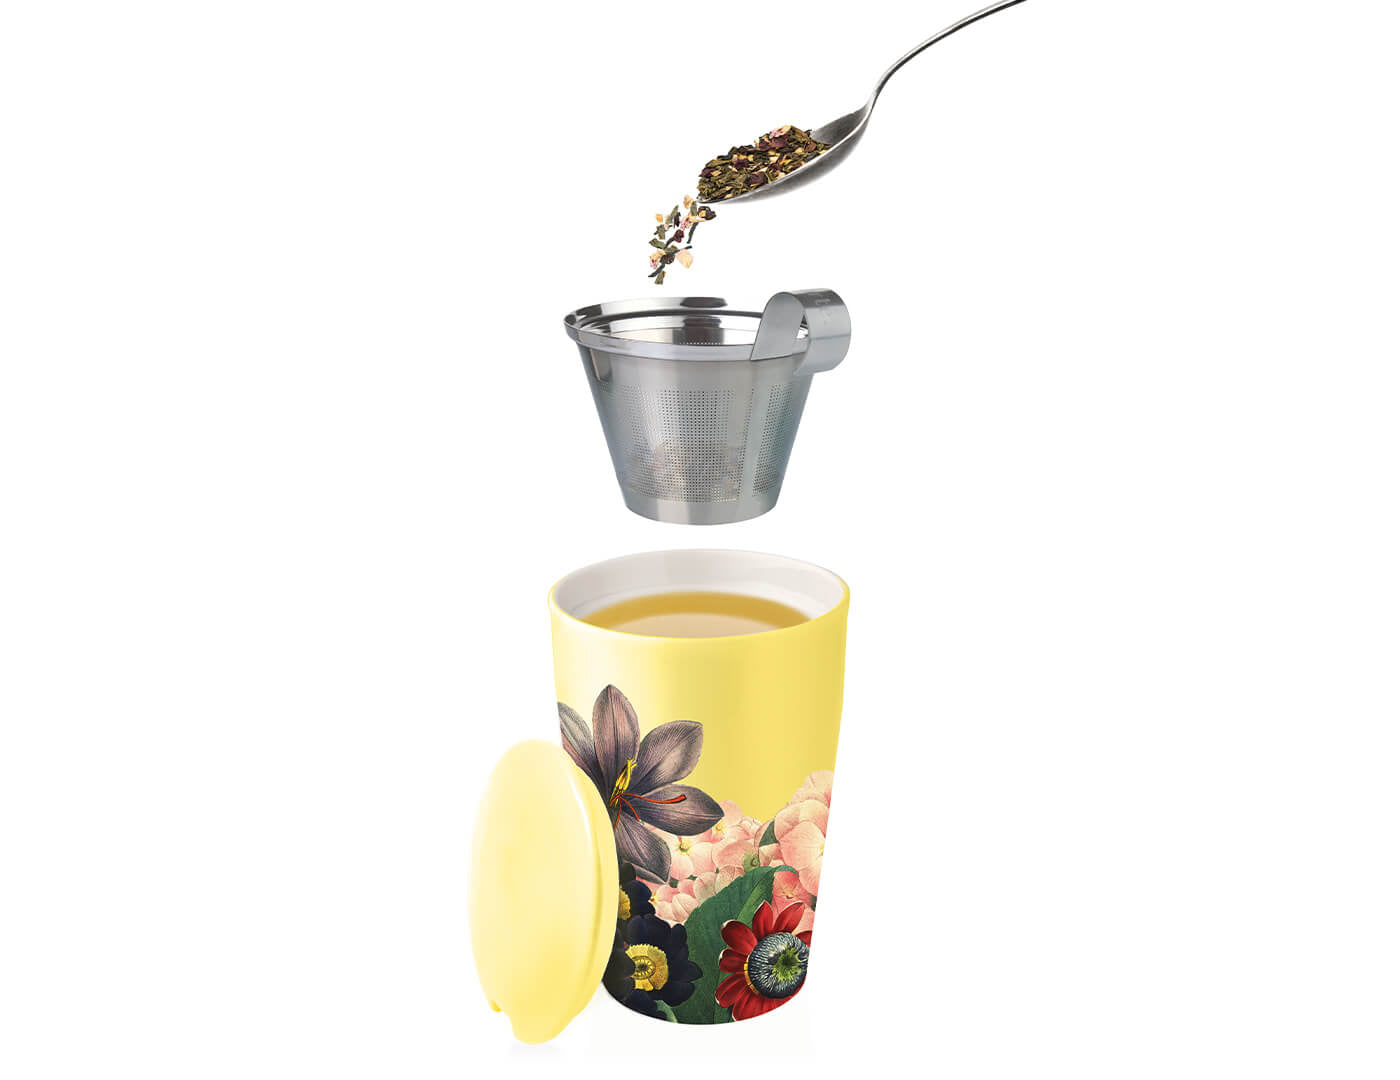 Soleil design KATI® Steeping cup with stainless steel infuser showing cup and stainless steel infuser